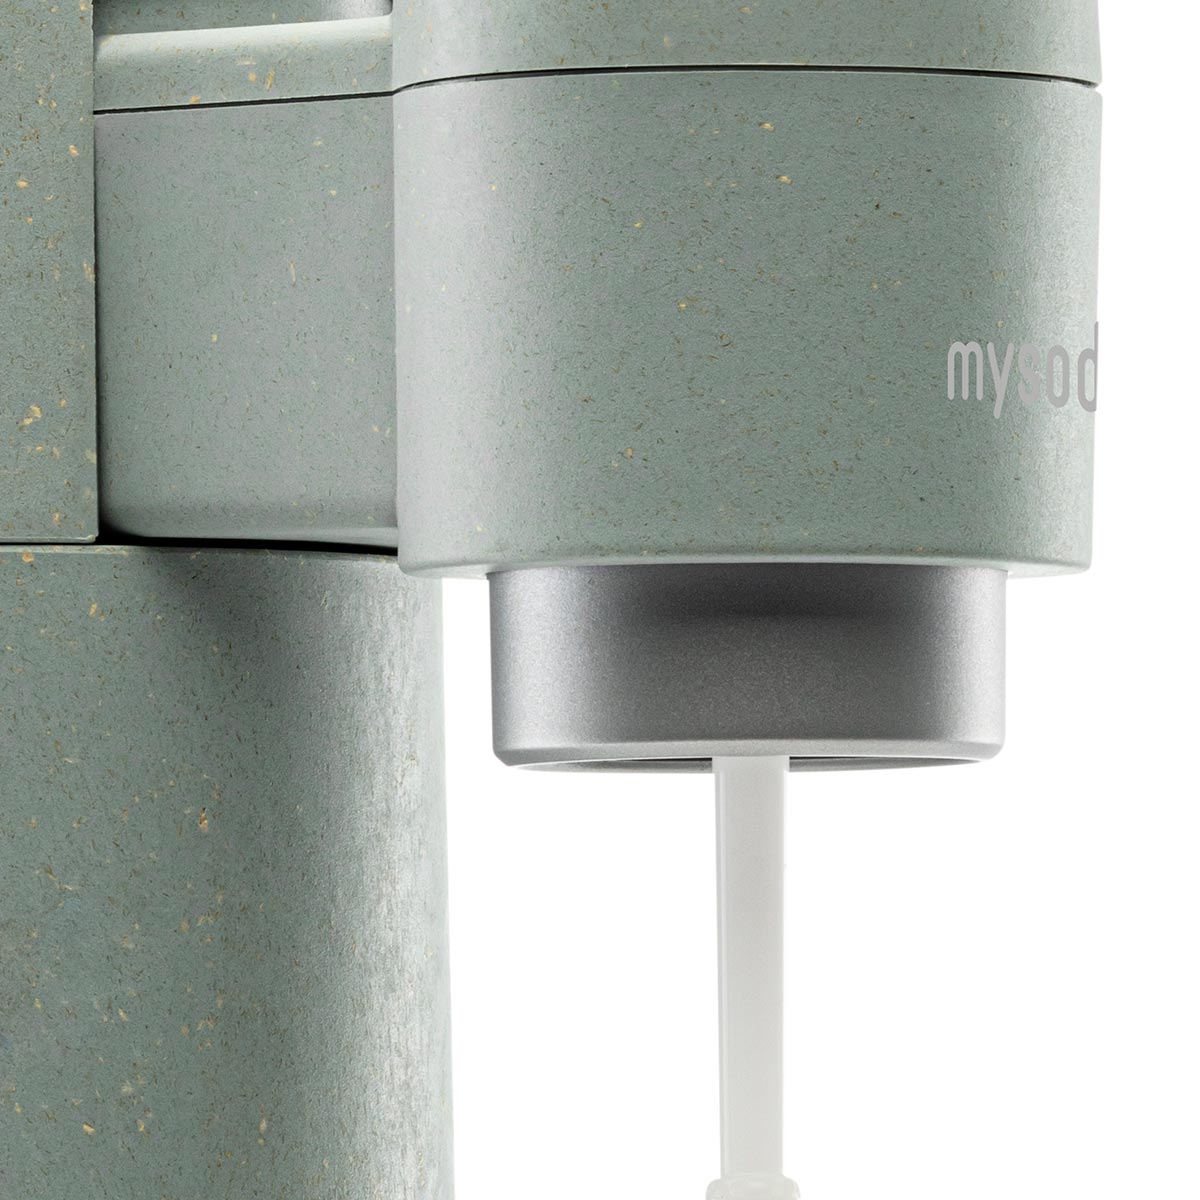 A close-up of a pigeon Mysoda Toby sparkling water maker